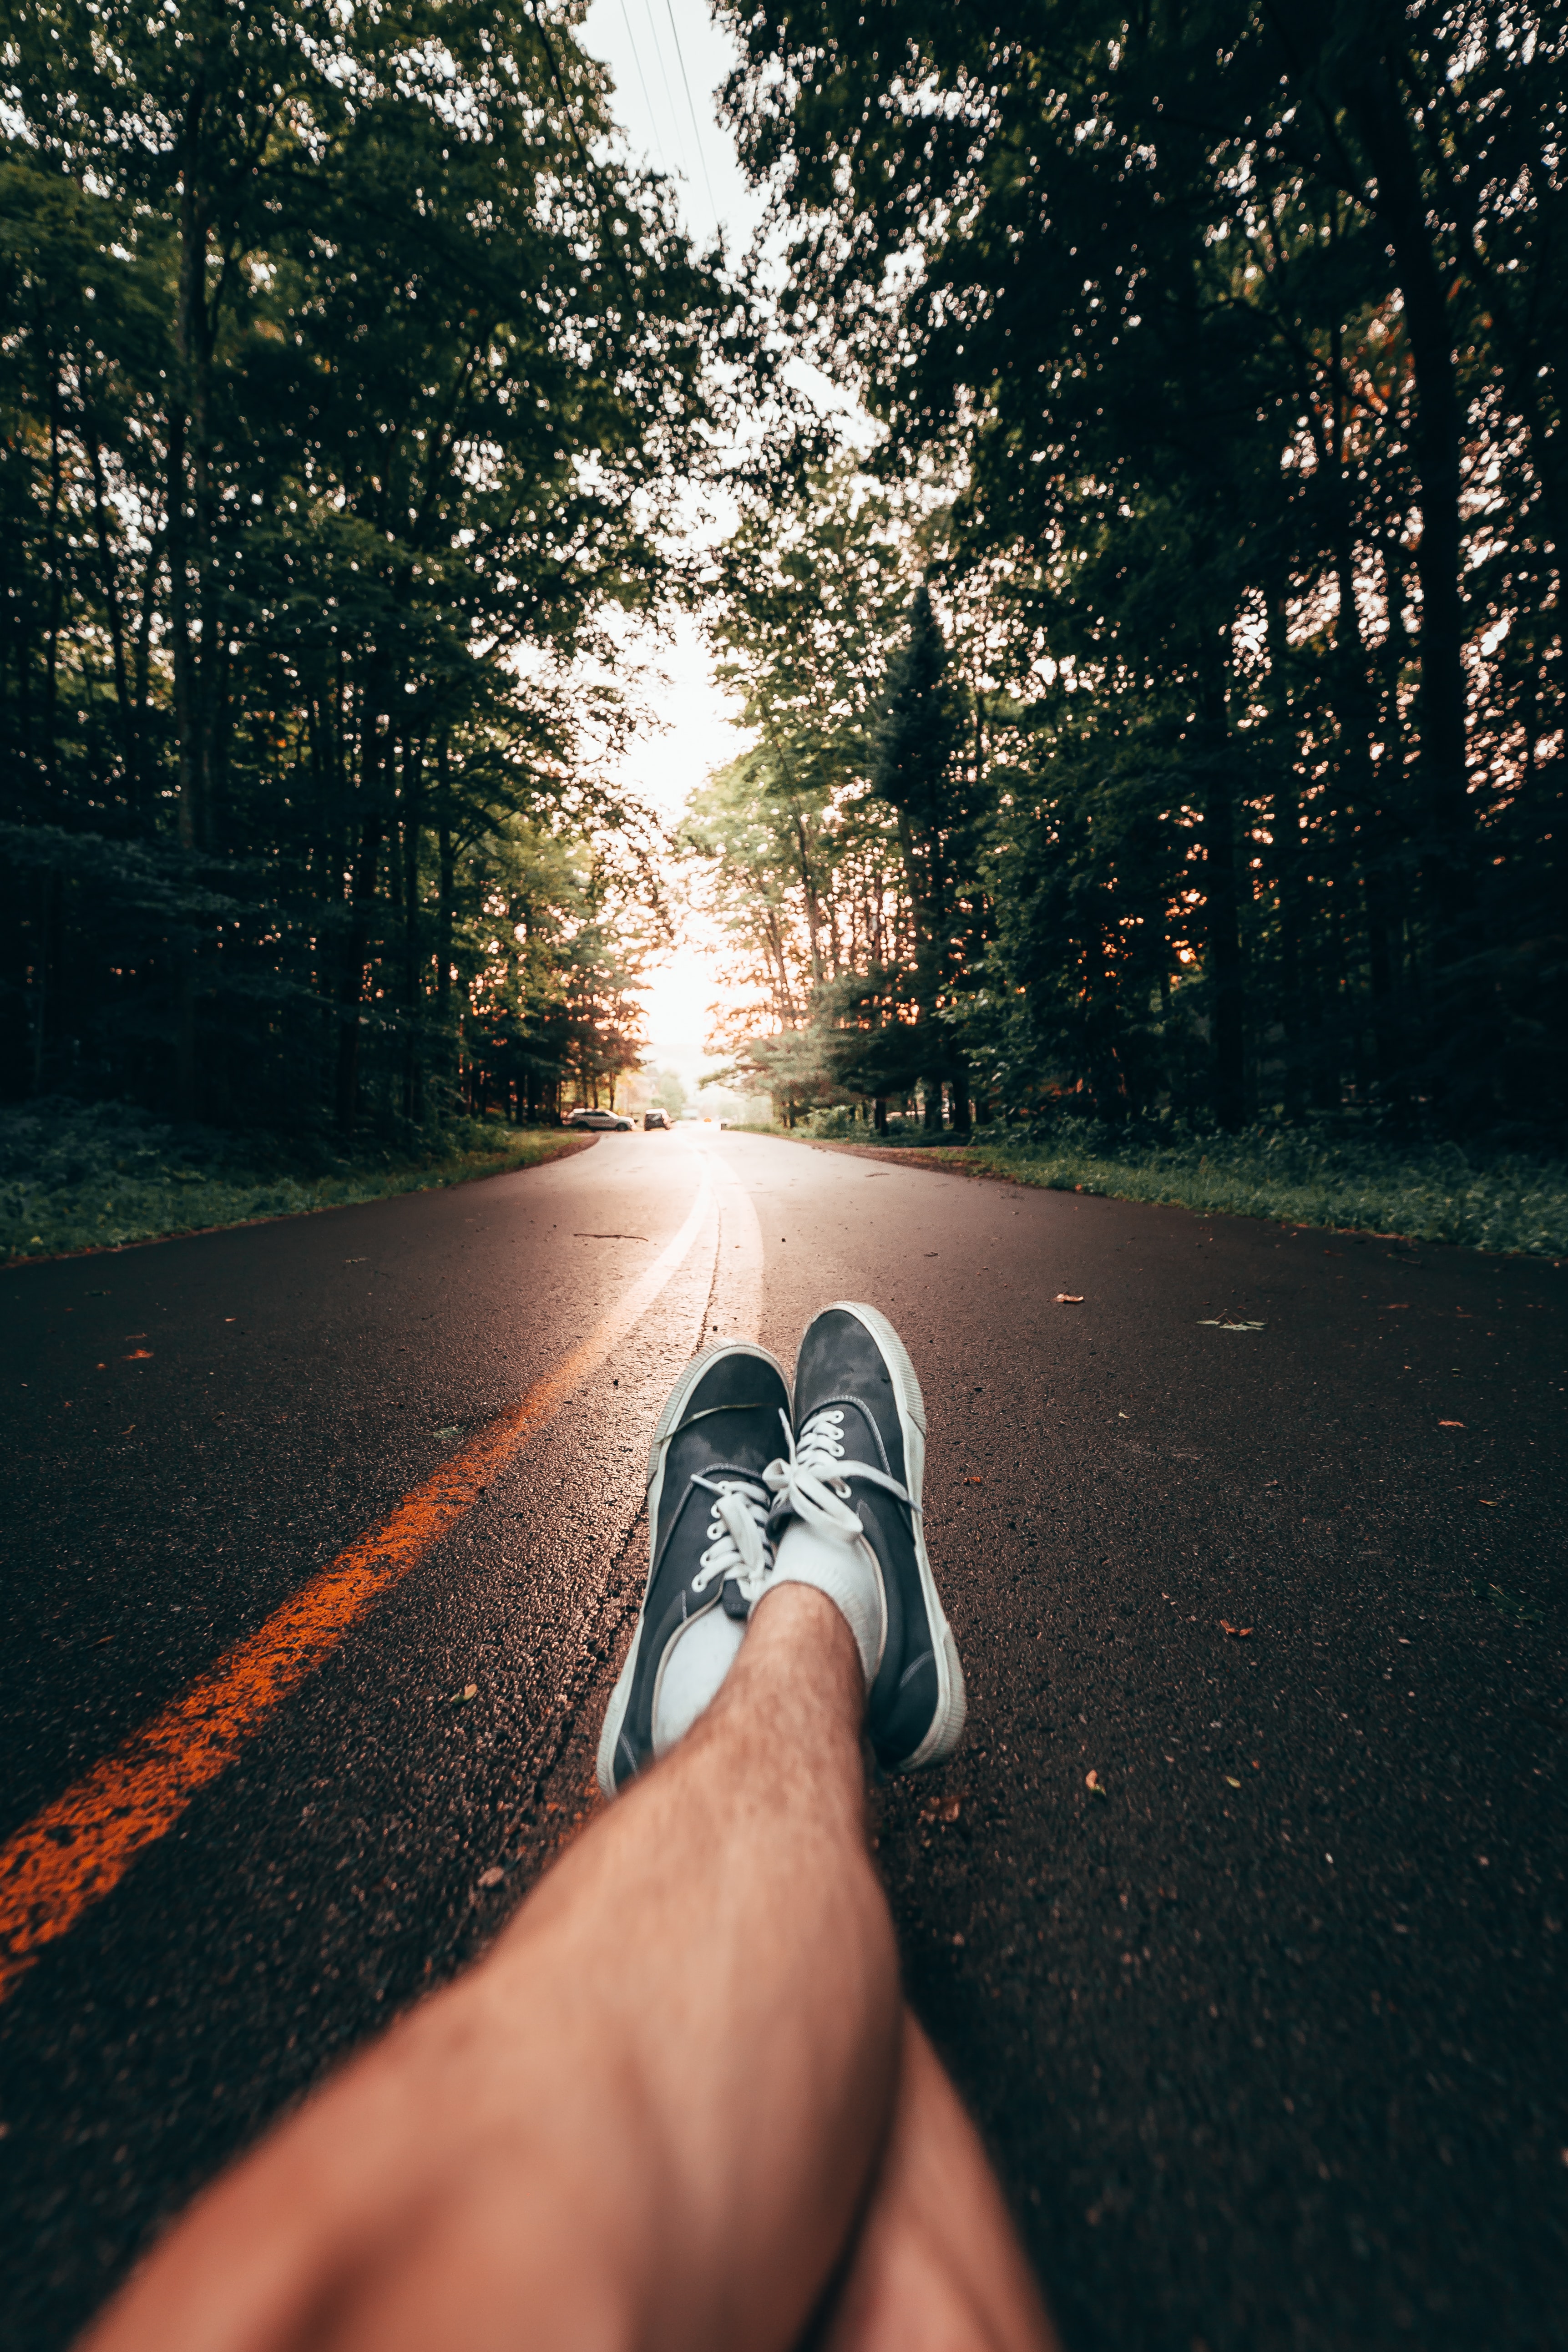 trees, miscellanea, miscellaneous, road, markup, legs, sneakers, shoes